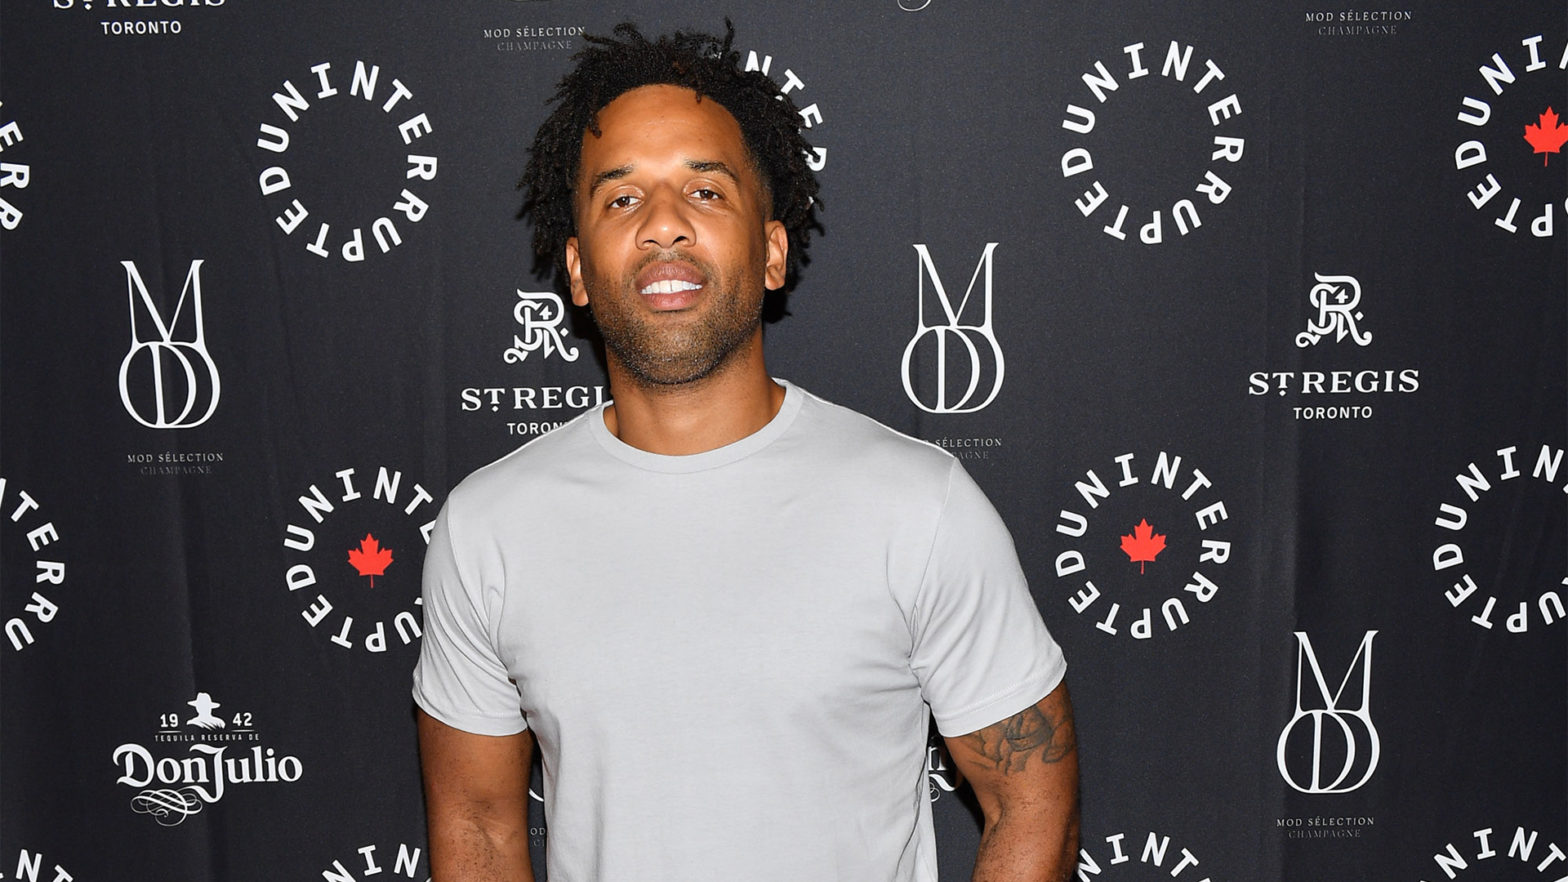 Red Sox Foundation Appoints Maverick Carter, LeBron James' Business Partner, To Its Board Of Directors